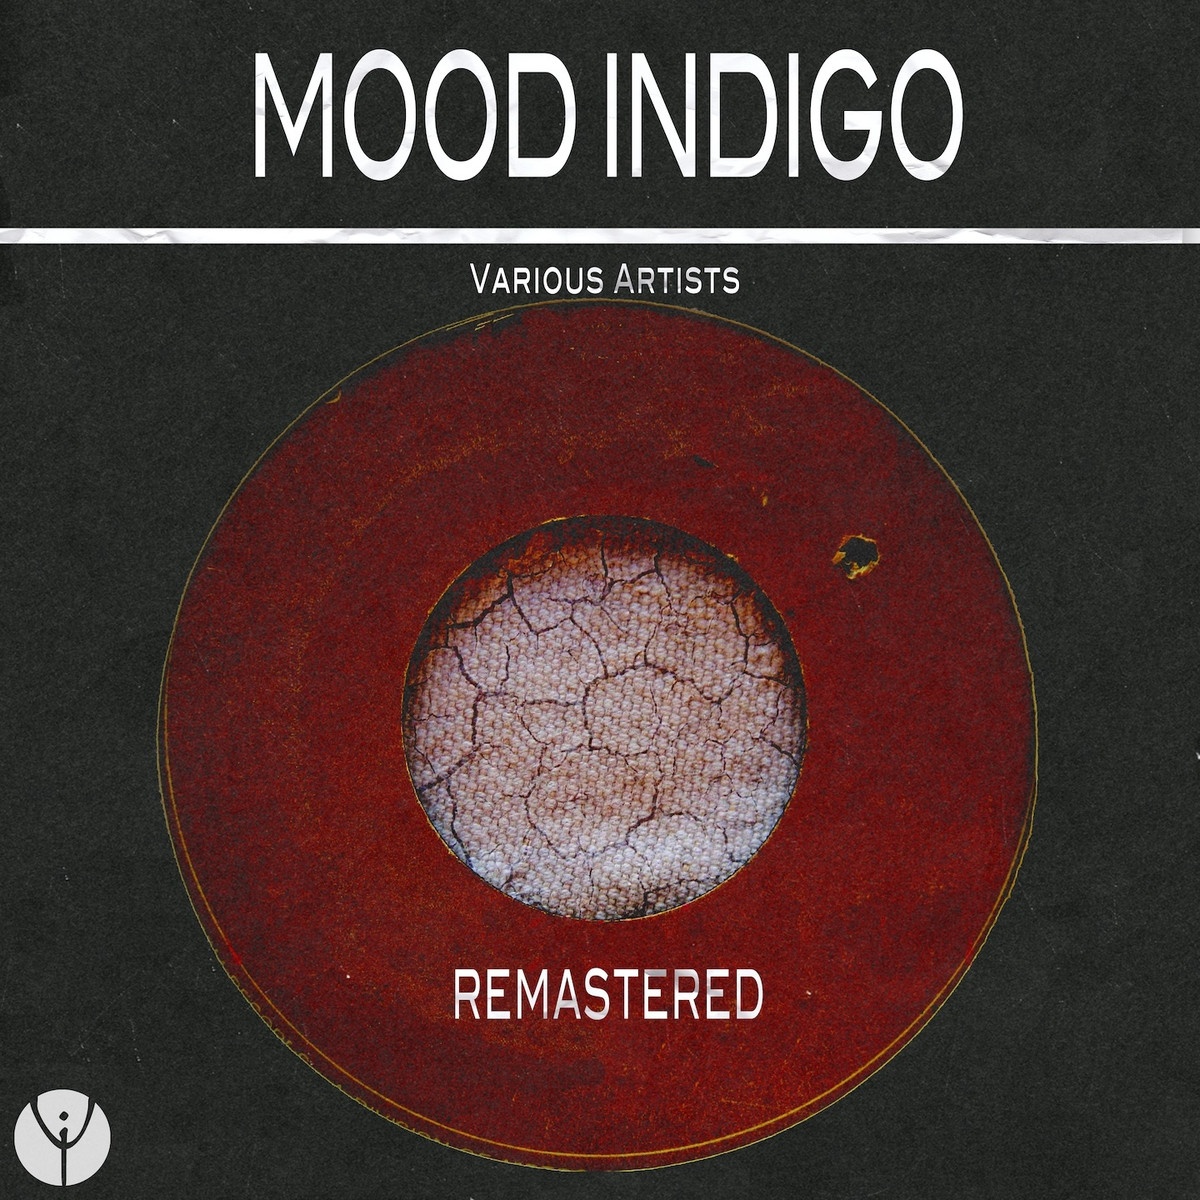 Mood Indigo - Live From Maybeck Studio For Performing Arts In Berkeley, CA/2000